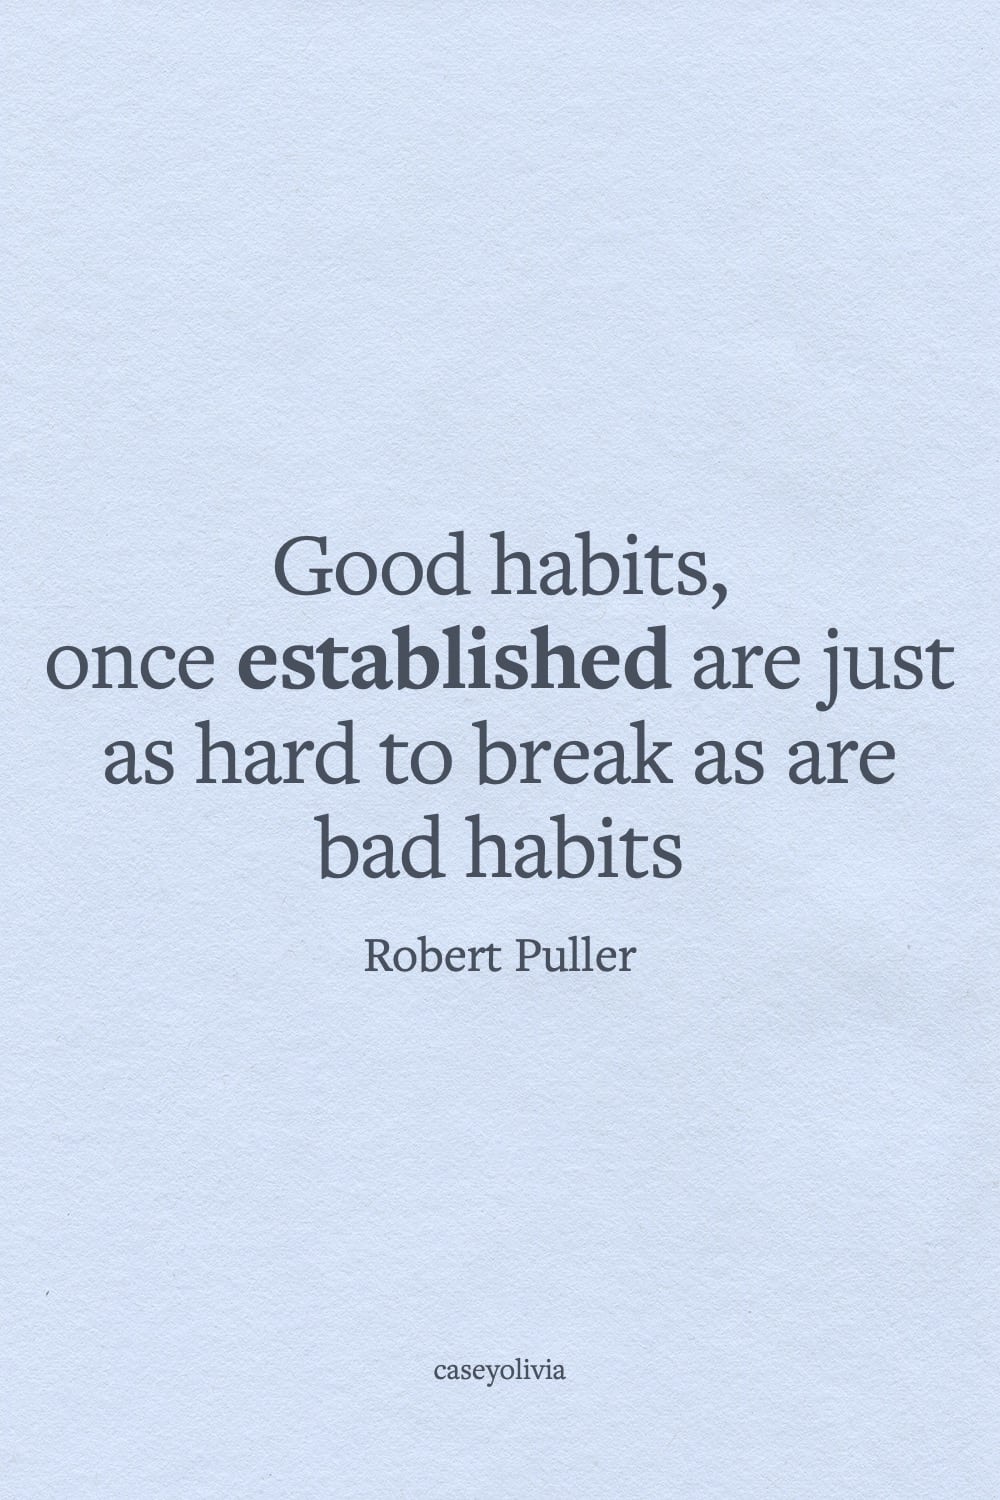 good habits are just as hard to break